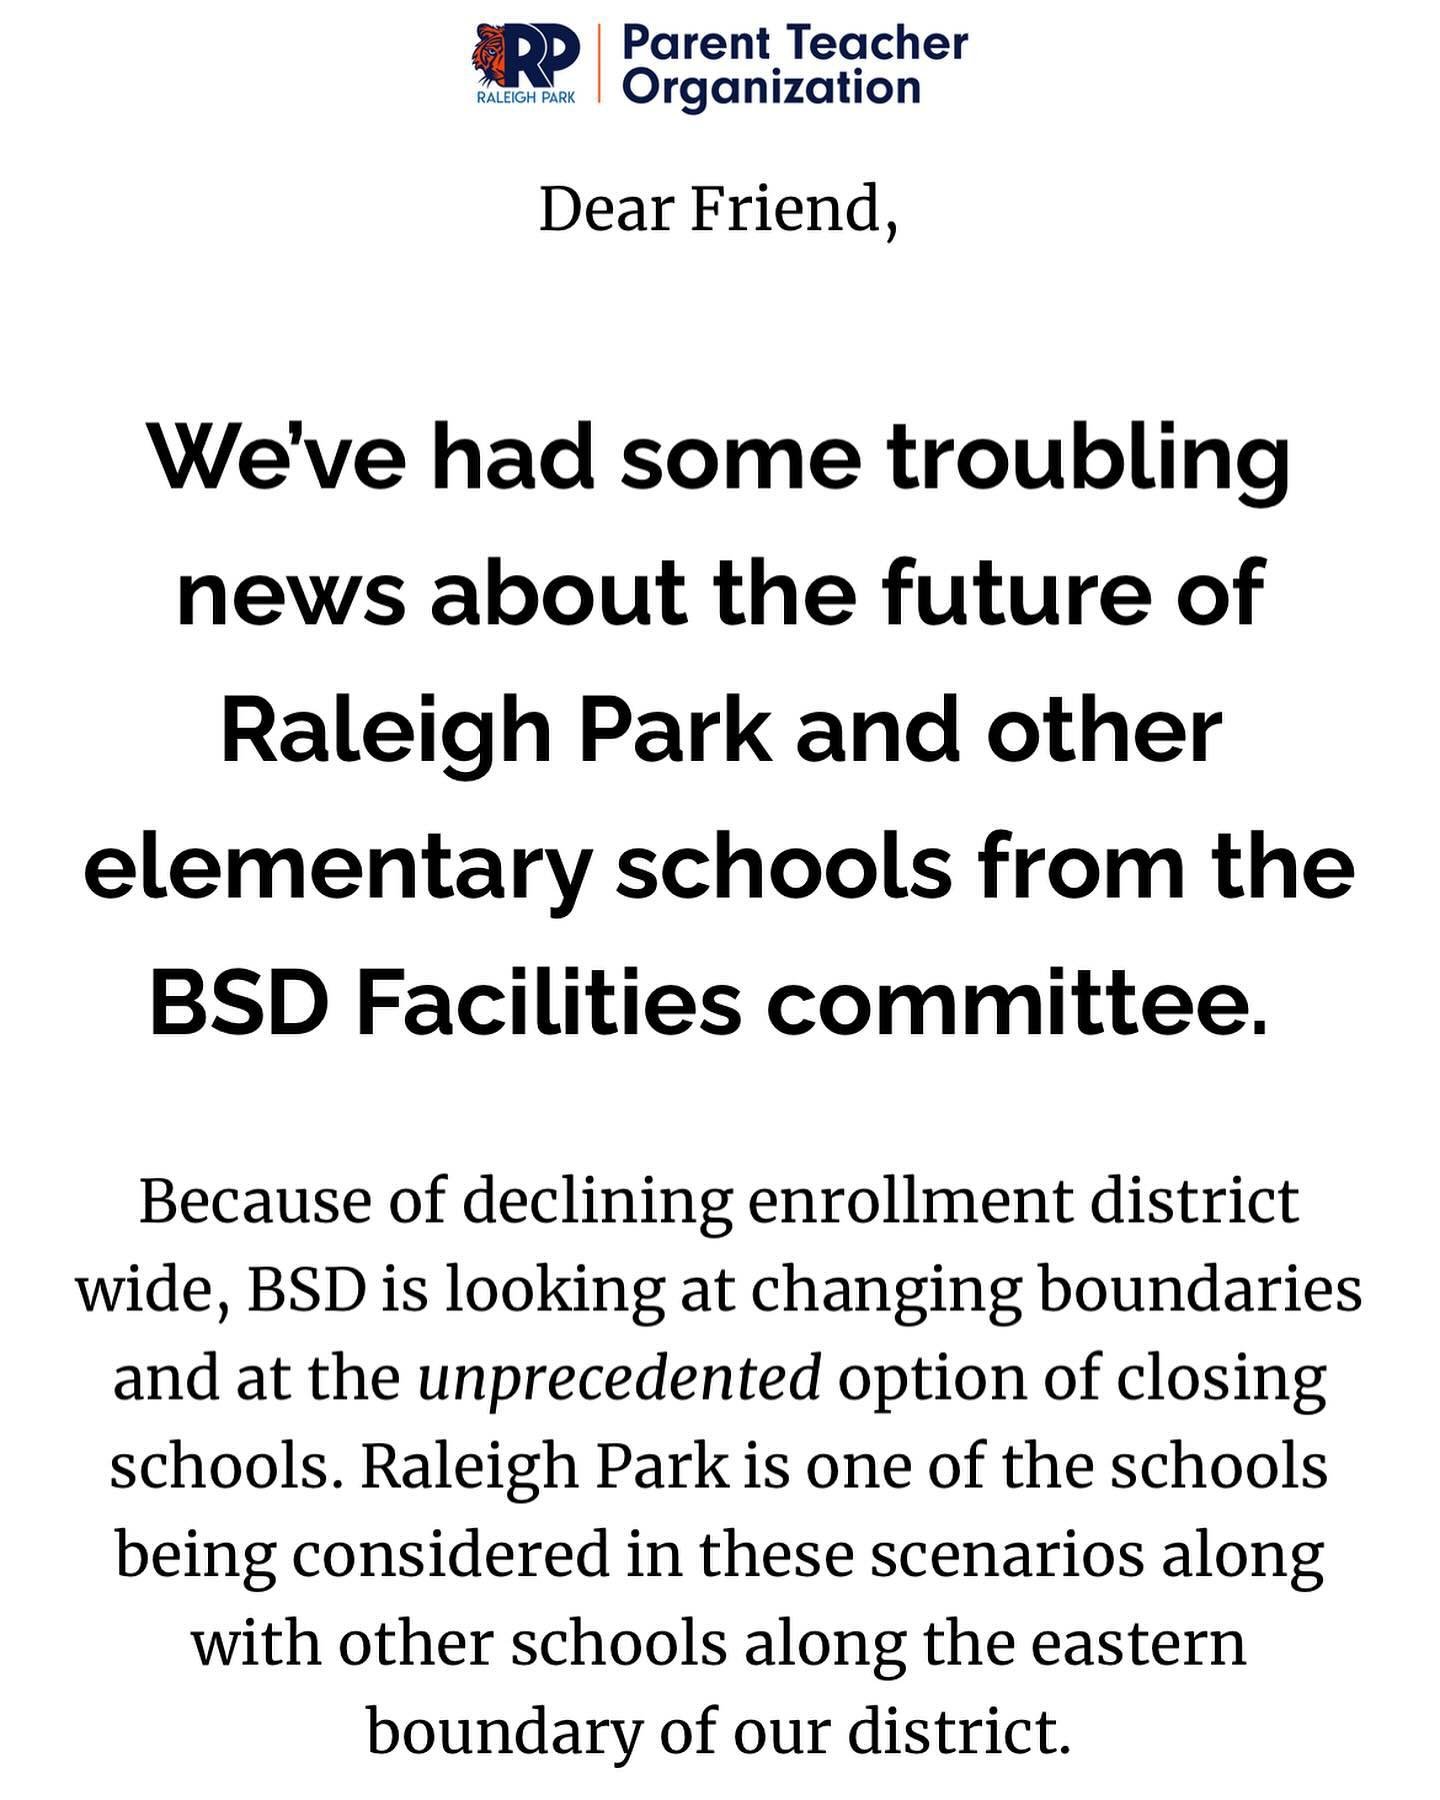 We want to fill the cafeteria to visually show the impact and support for Raleigh Park Elementary School. All community members are welcome to attend, not just current families, and we encourage you all to attend in person.

QA with BSD Facilities Re